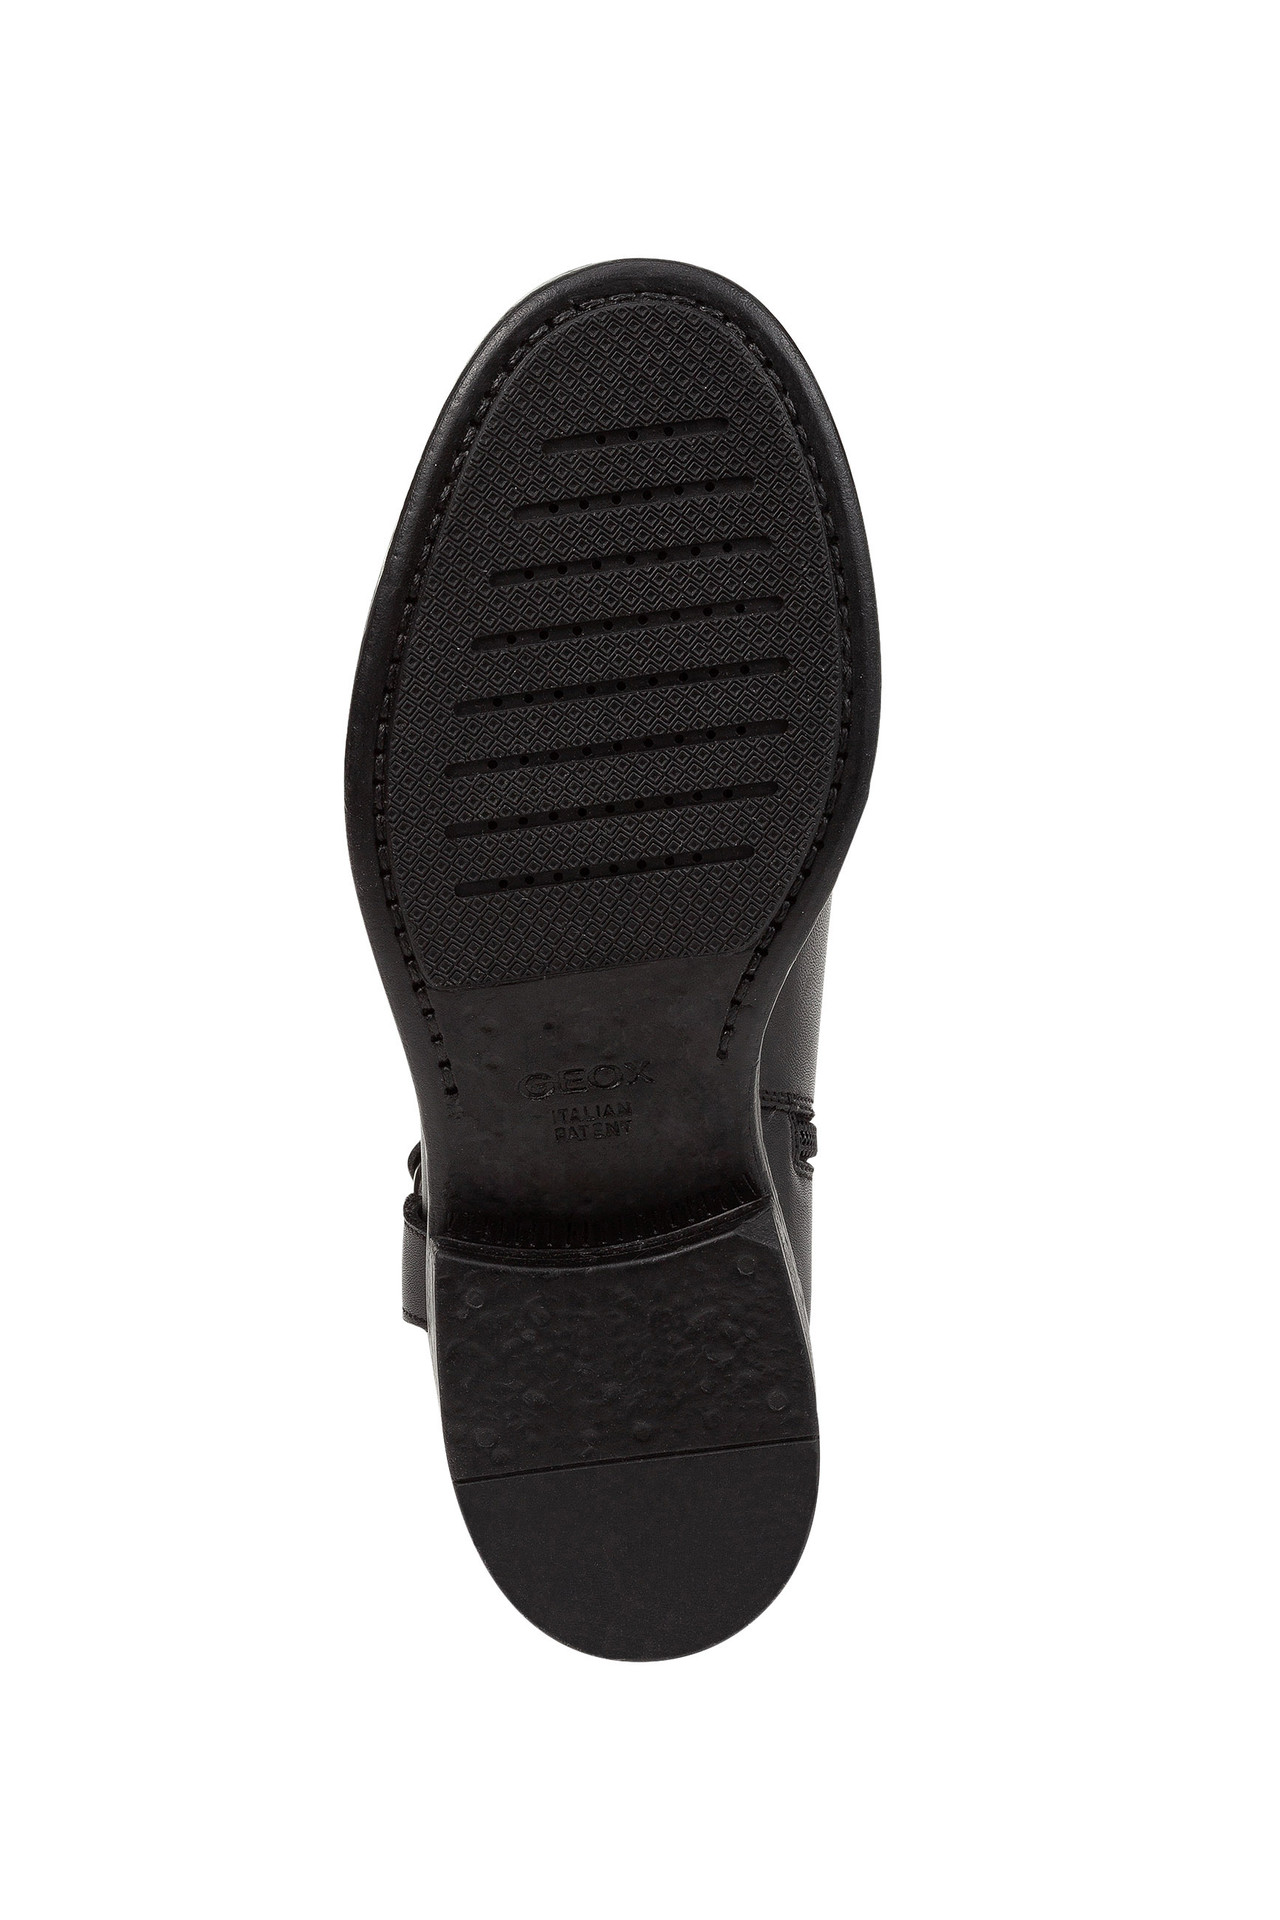 GEOX Catria - Black smooth leather